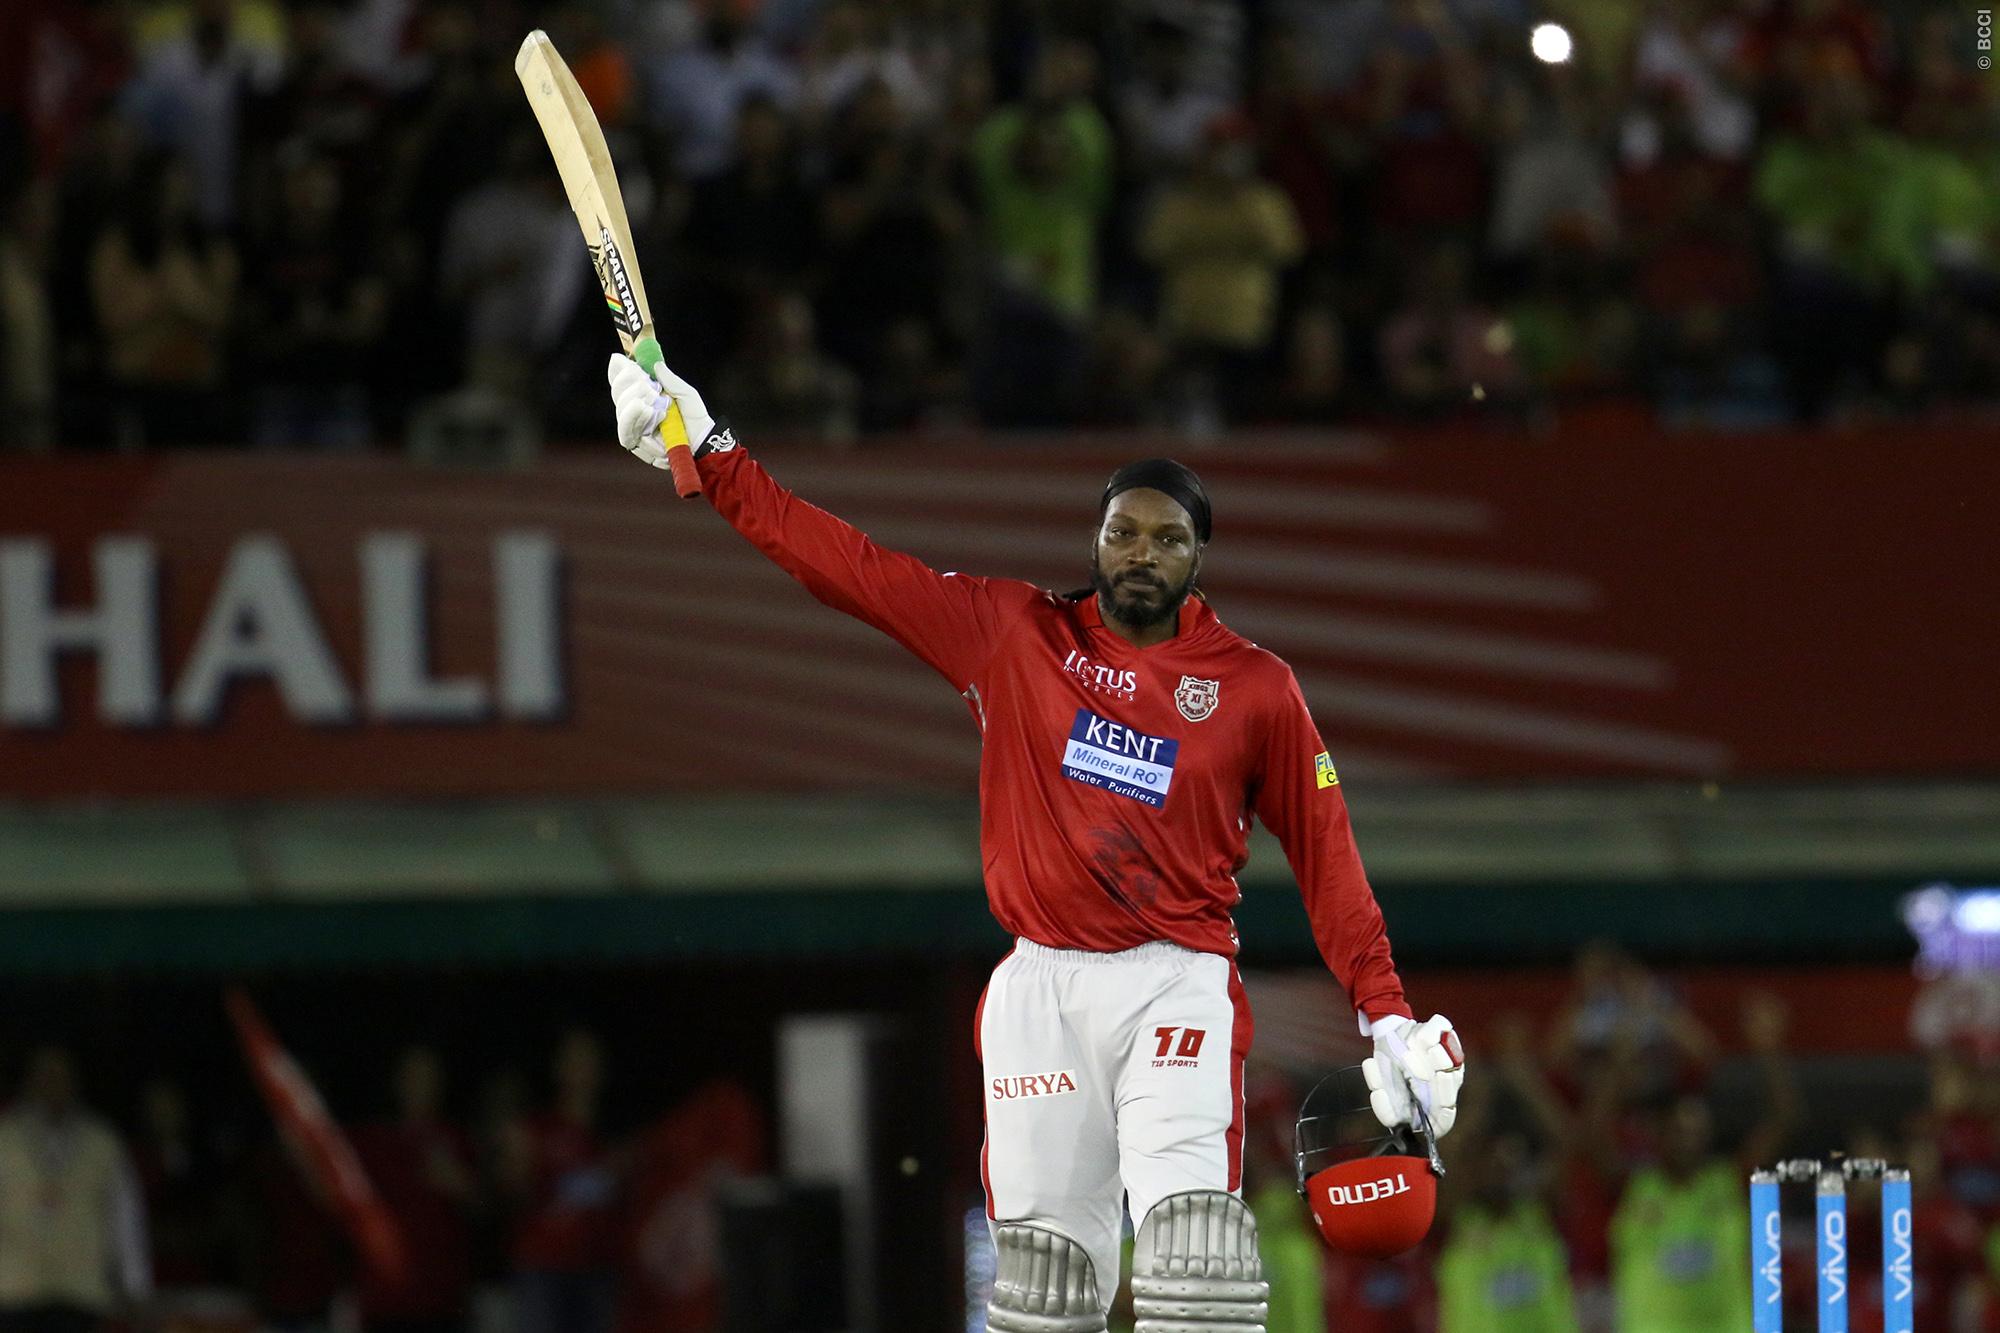   Twitter reacts to Chris Gayle’s 'Going to Pakistan Tomorrow' tweet after New Zealand call off white-ball tour 